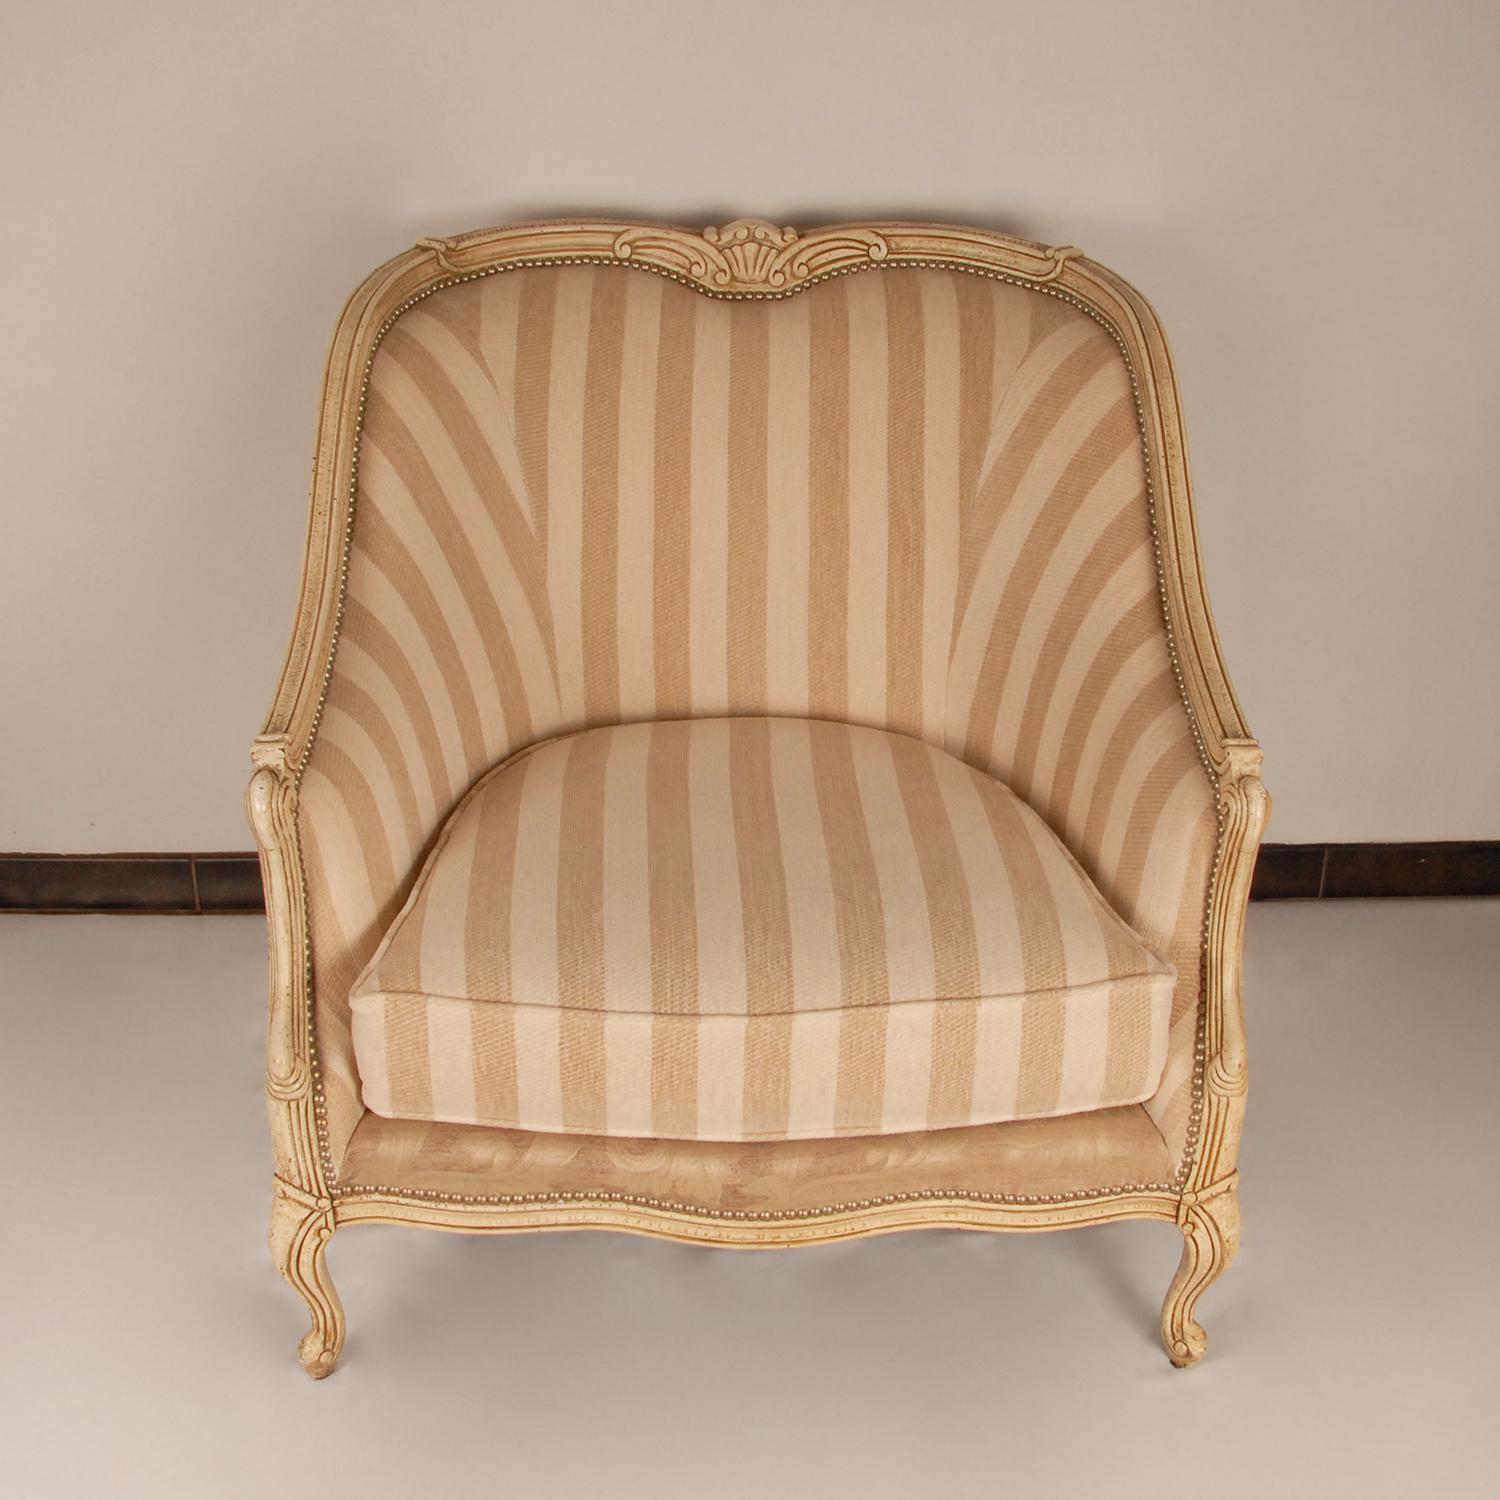 French Provincial French Country Henredon Beacon Hill Oversized Bergere Chairs Armchairs a Pair